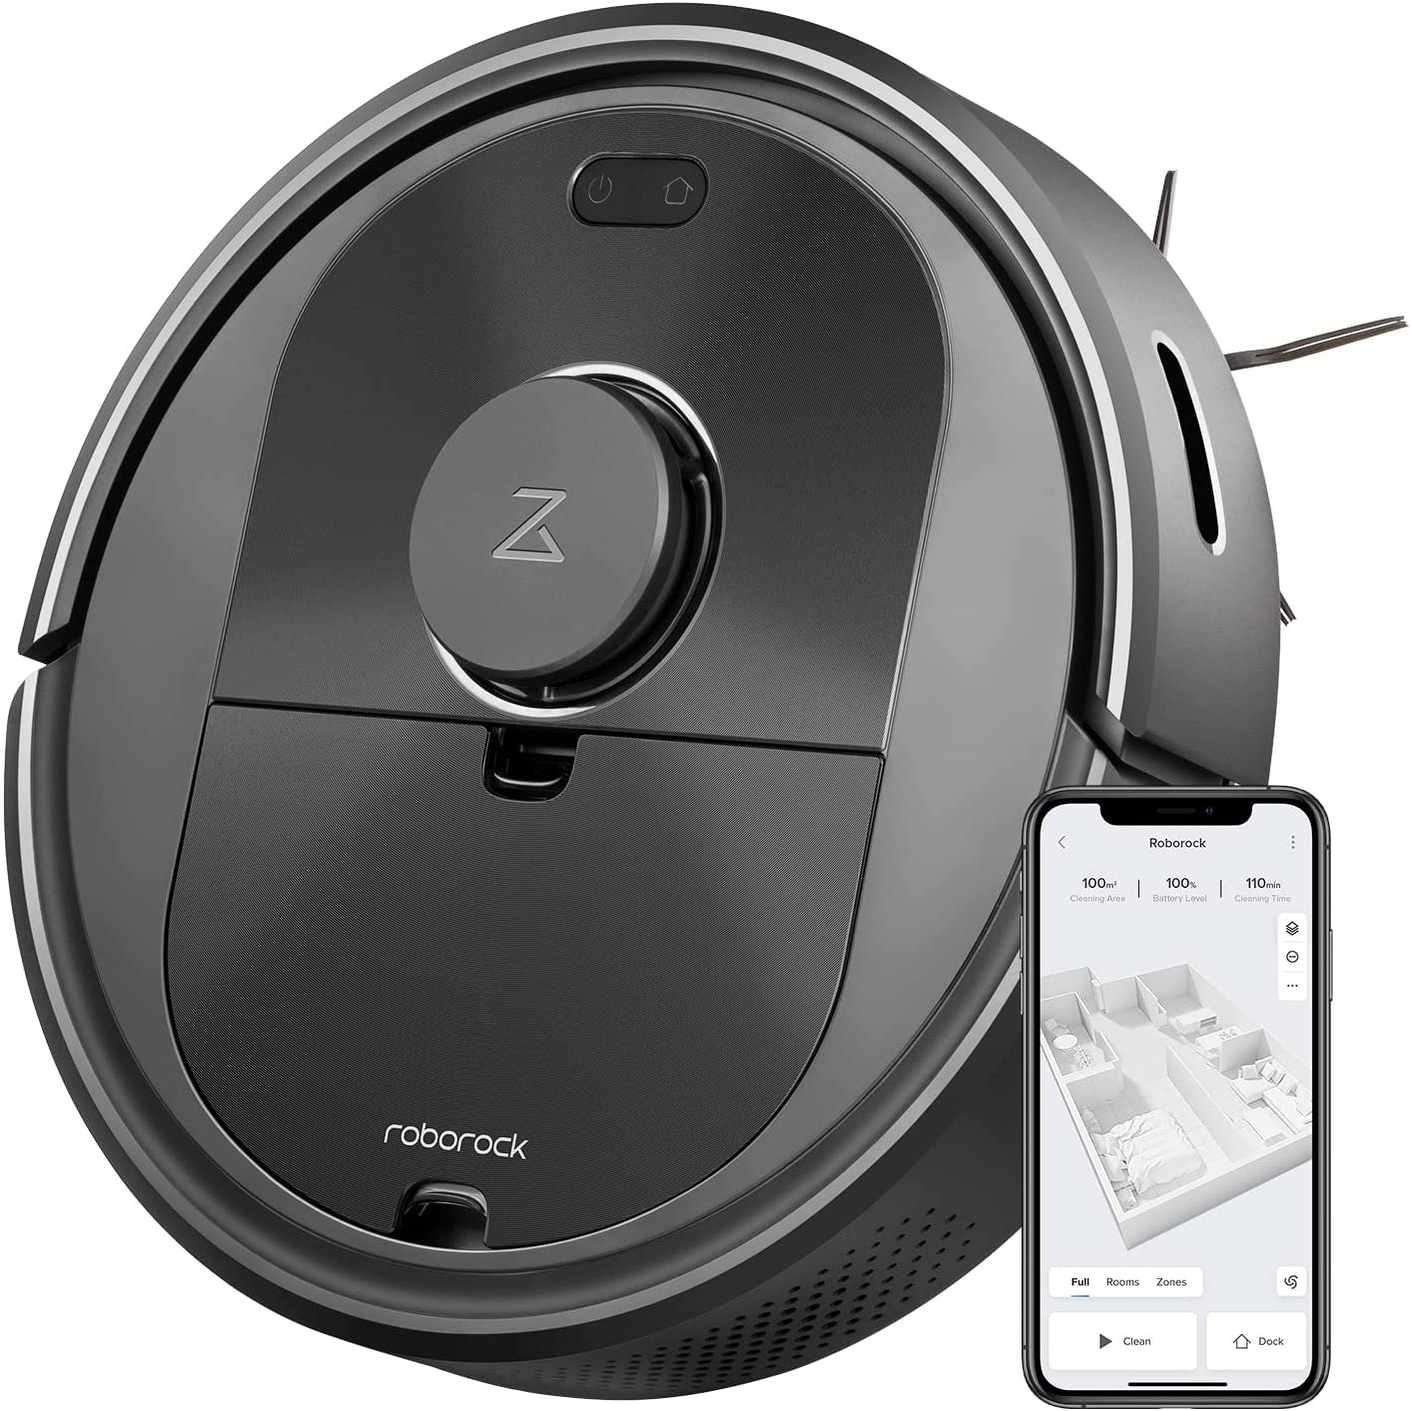 Roborock's Q7 Max robotic vacuum and mop laser maps your home at $400 (Save  33%)